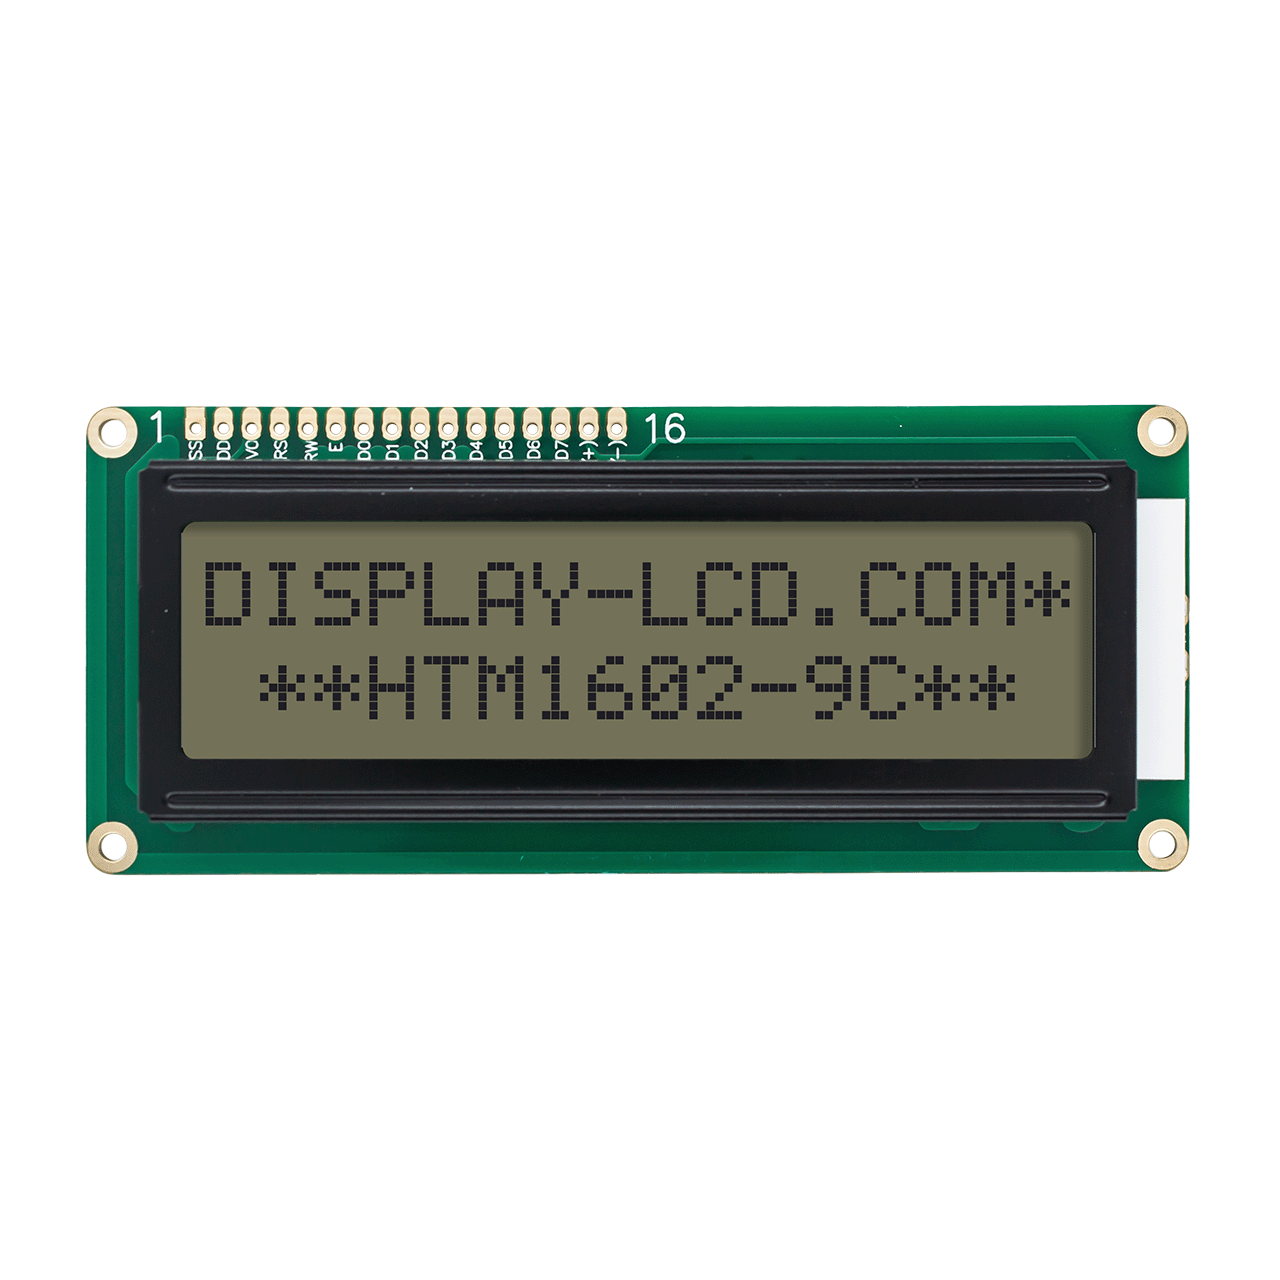 2X16 character LCD Module display | FSTN+ with white backlight 5.0V-Arduino